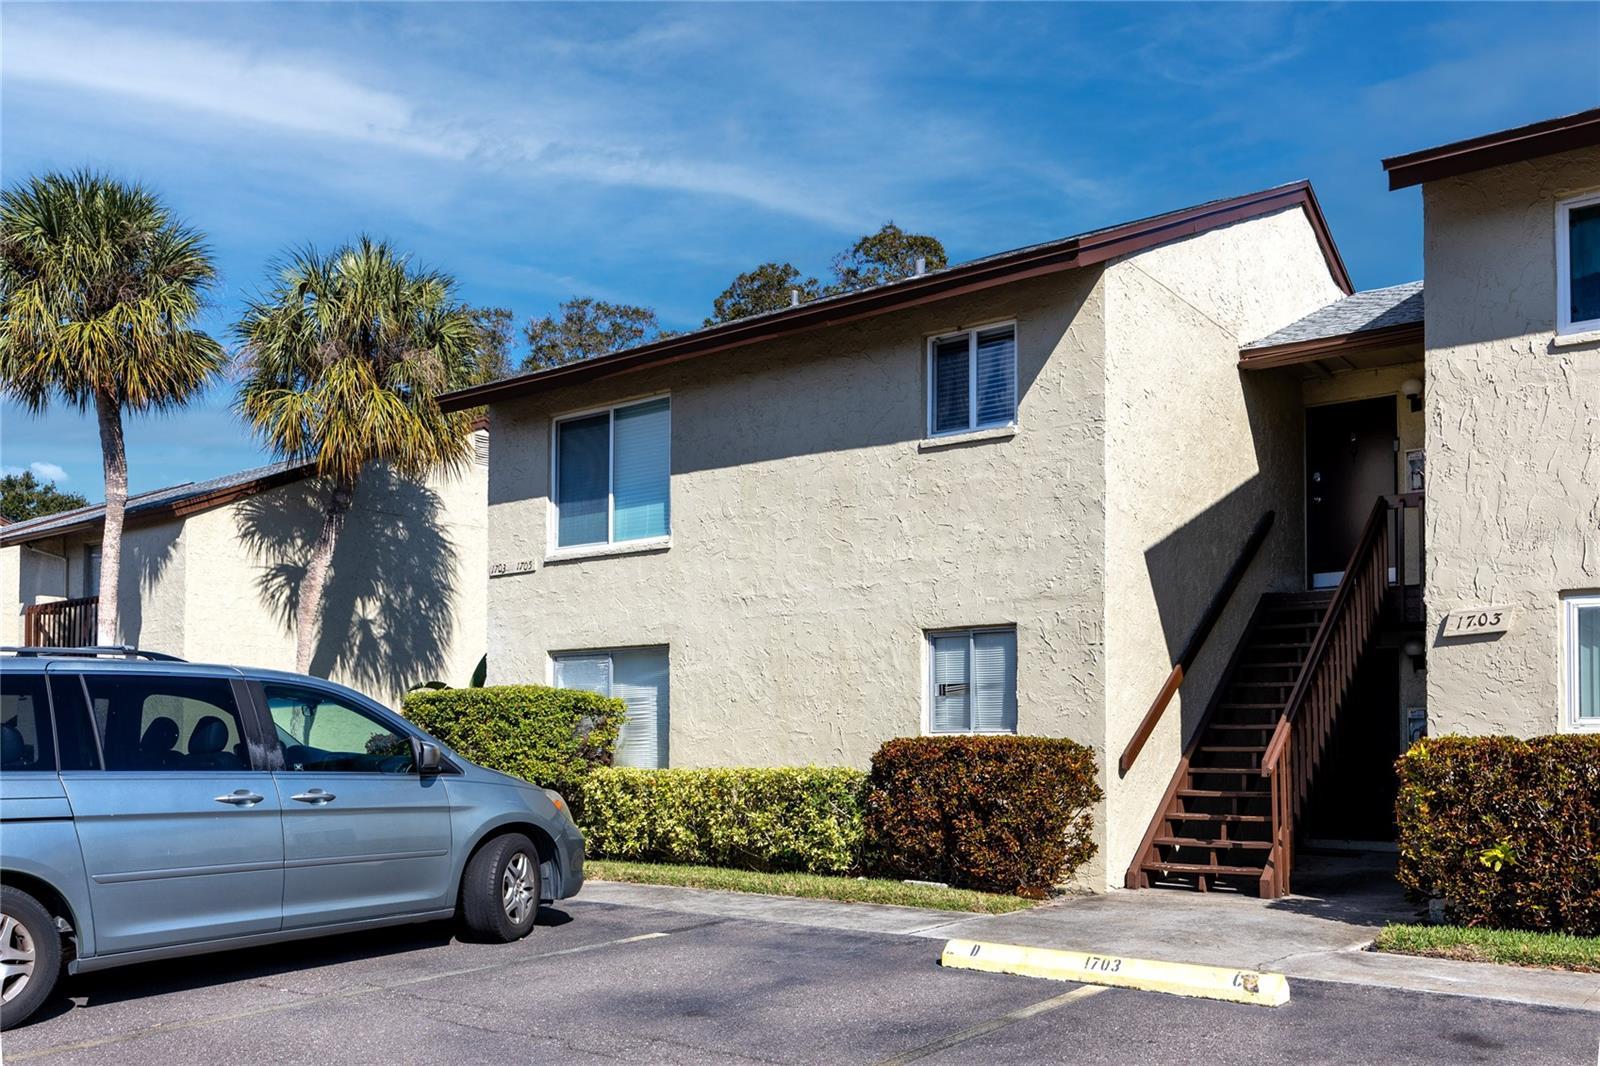 Photo one of 4215 E Bay Dr # 1703D Clearwater FL 33764 | MLS U8237130